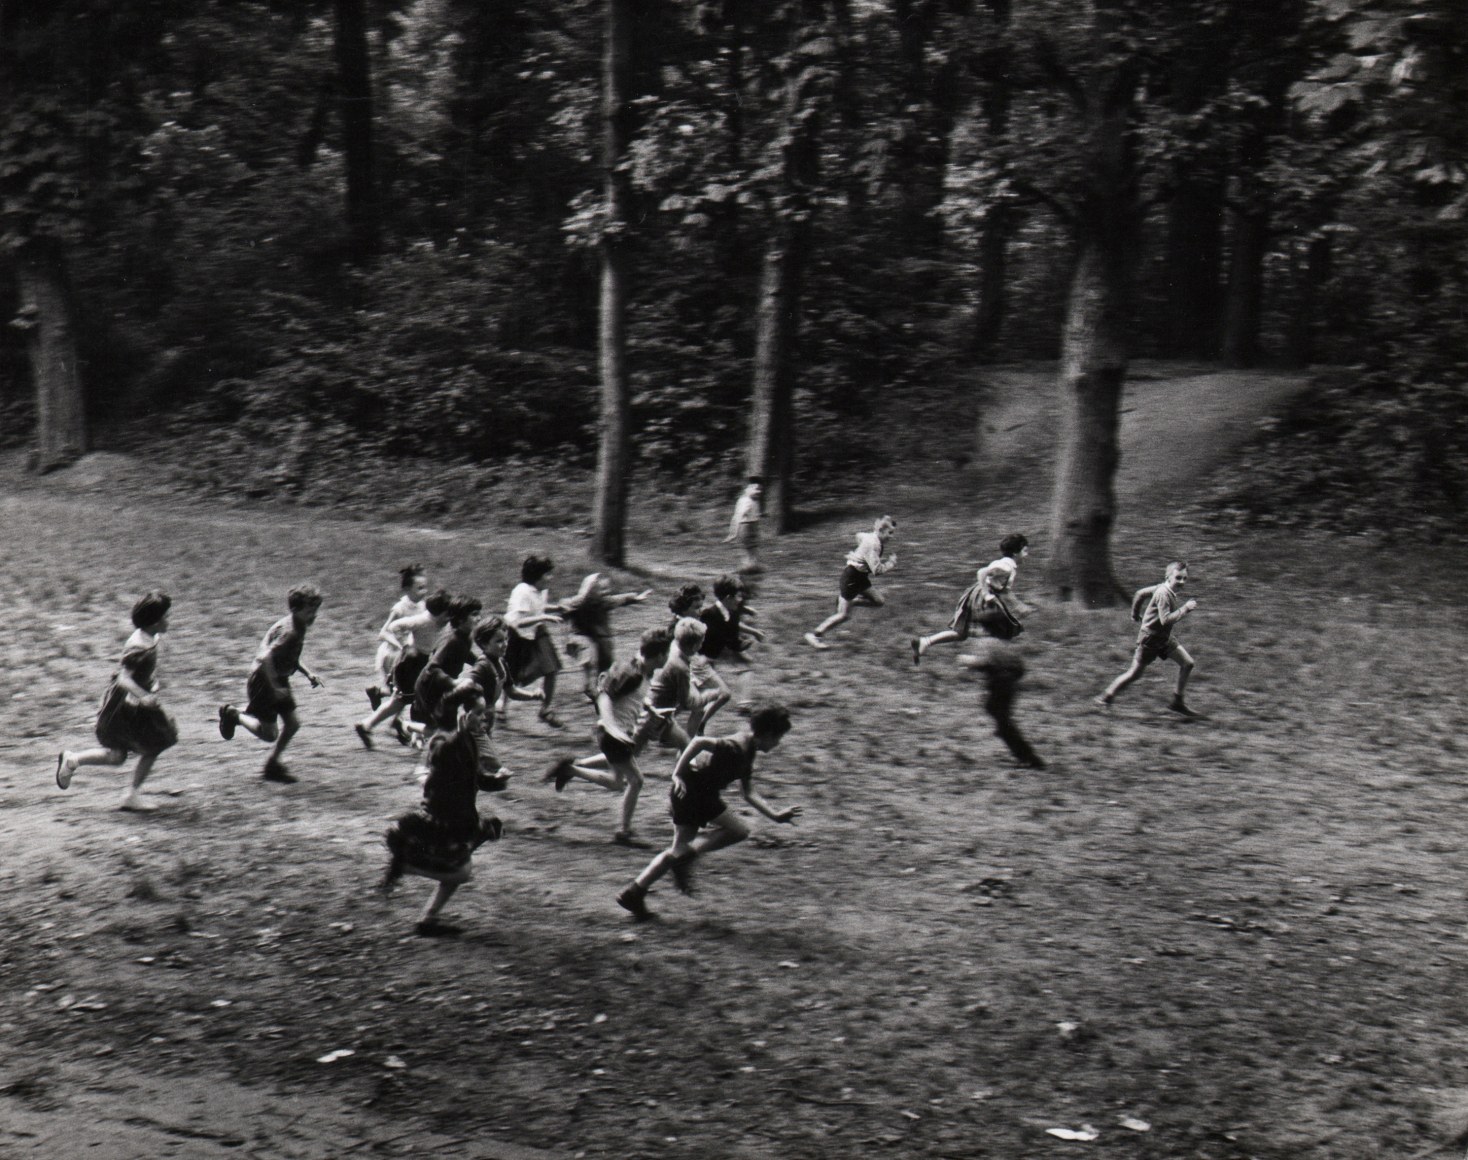 52. Janine Ni&eacute;pce, La course, c. 1960. A group of children, blurred with motion, run from left to right across the frame in a wooded setting.